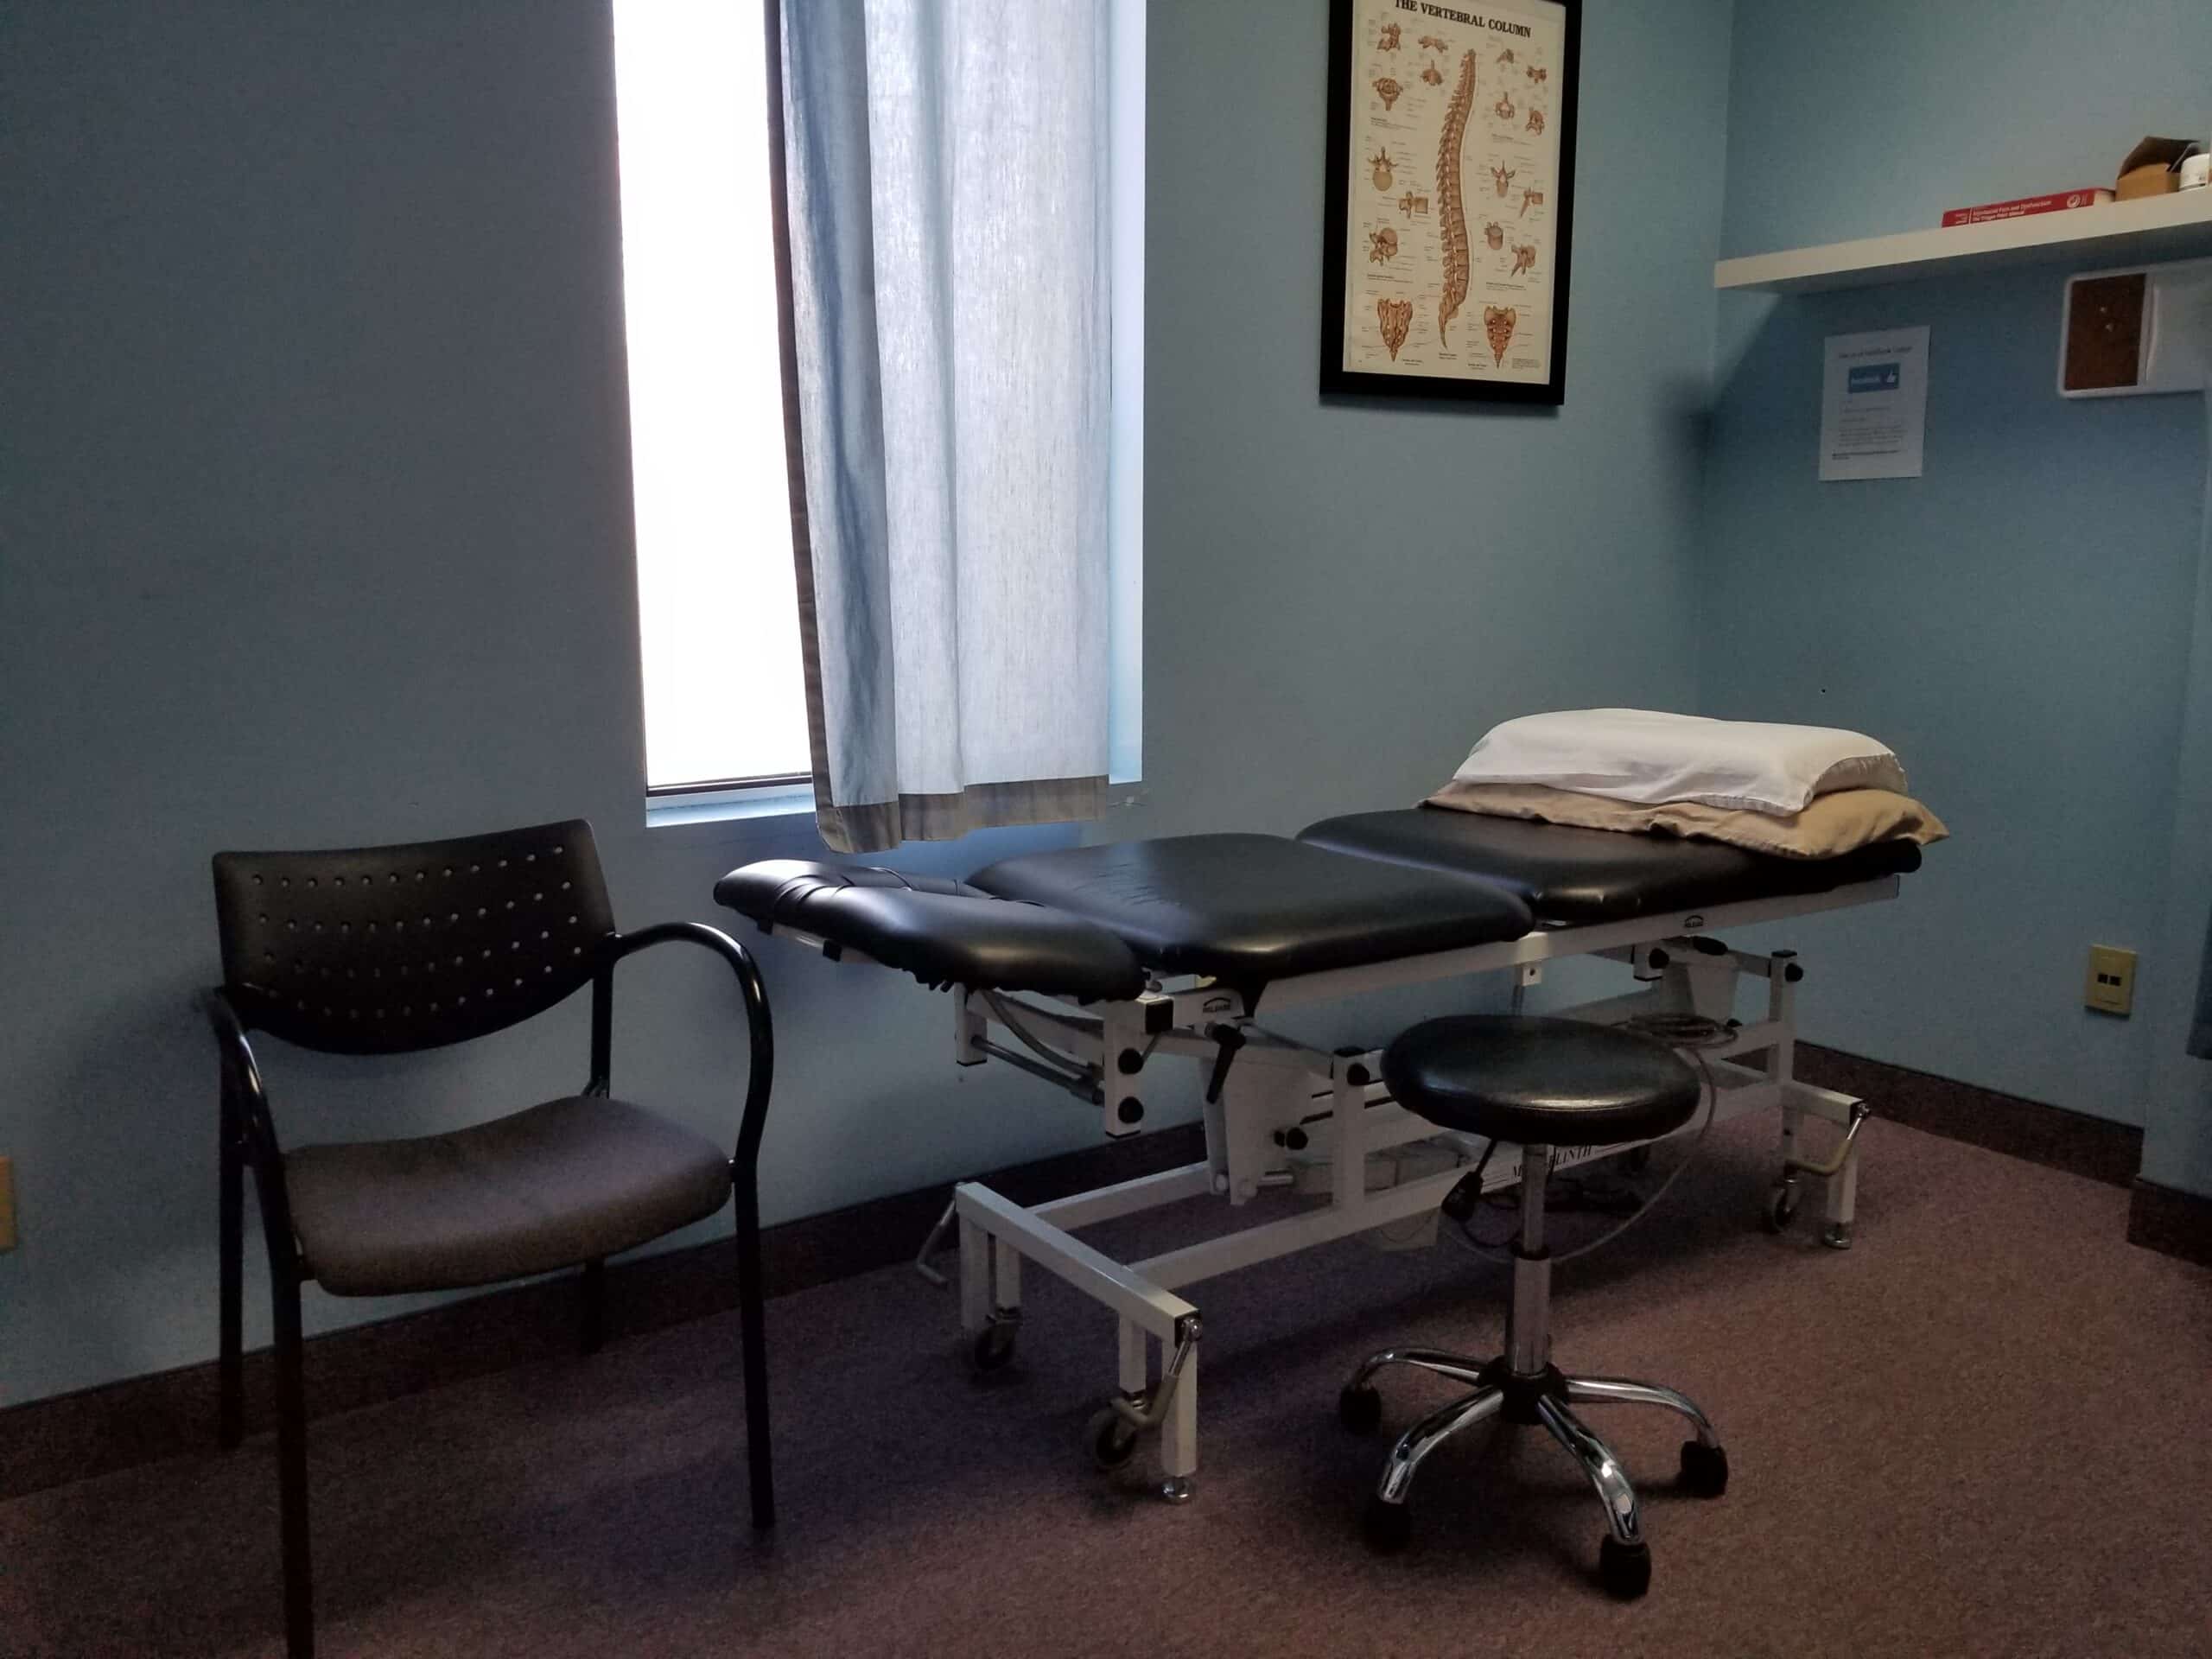 Queen West Physiotherapy & Acupuncture in Brampton Treatement